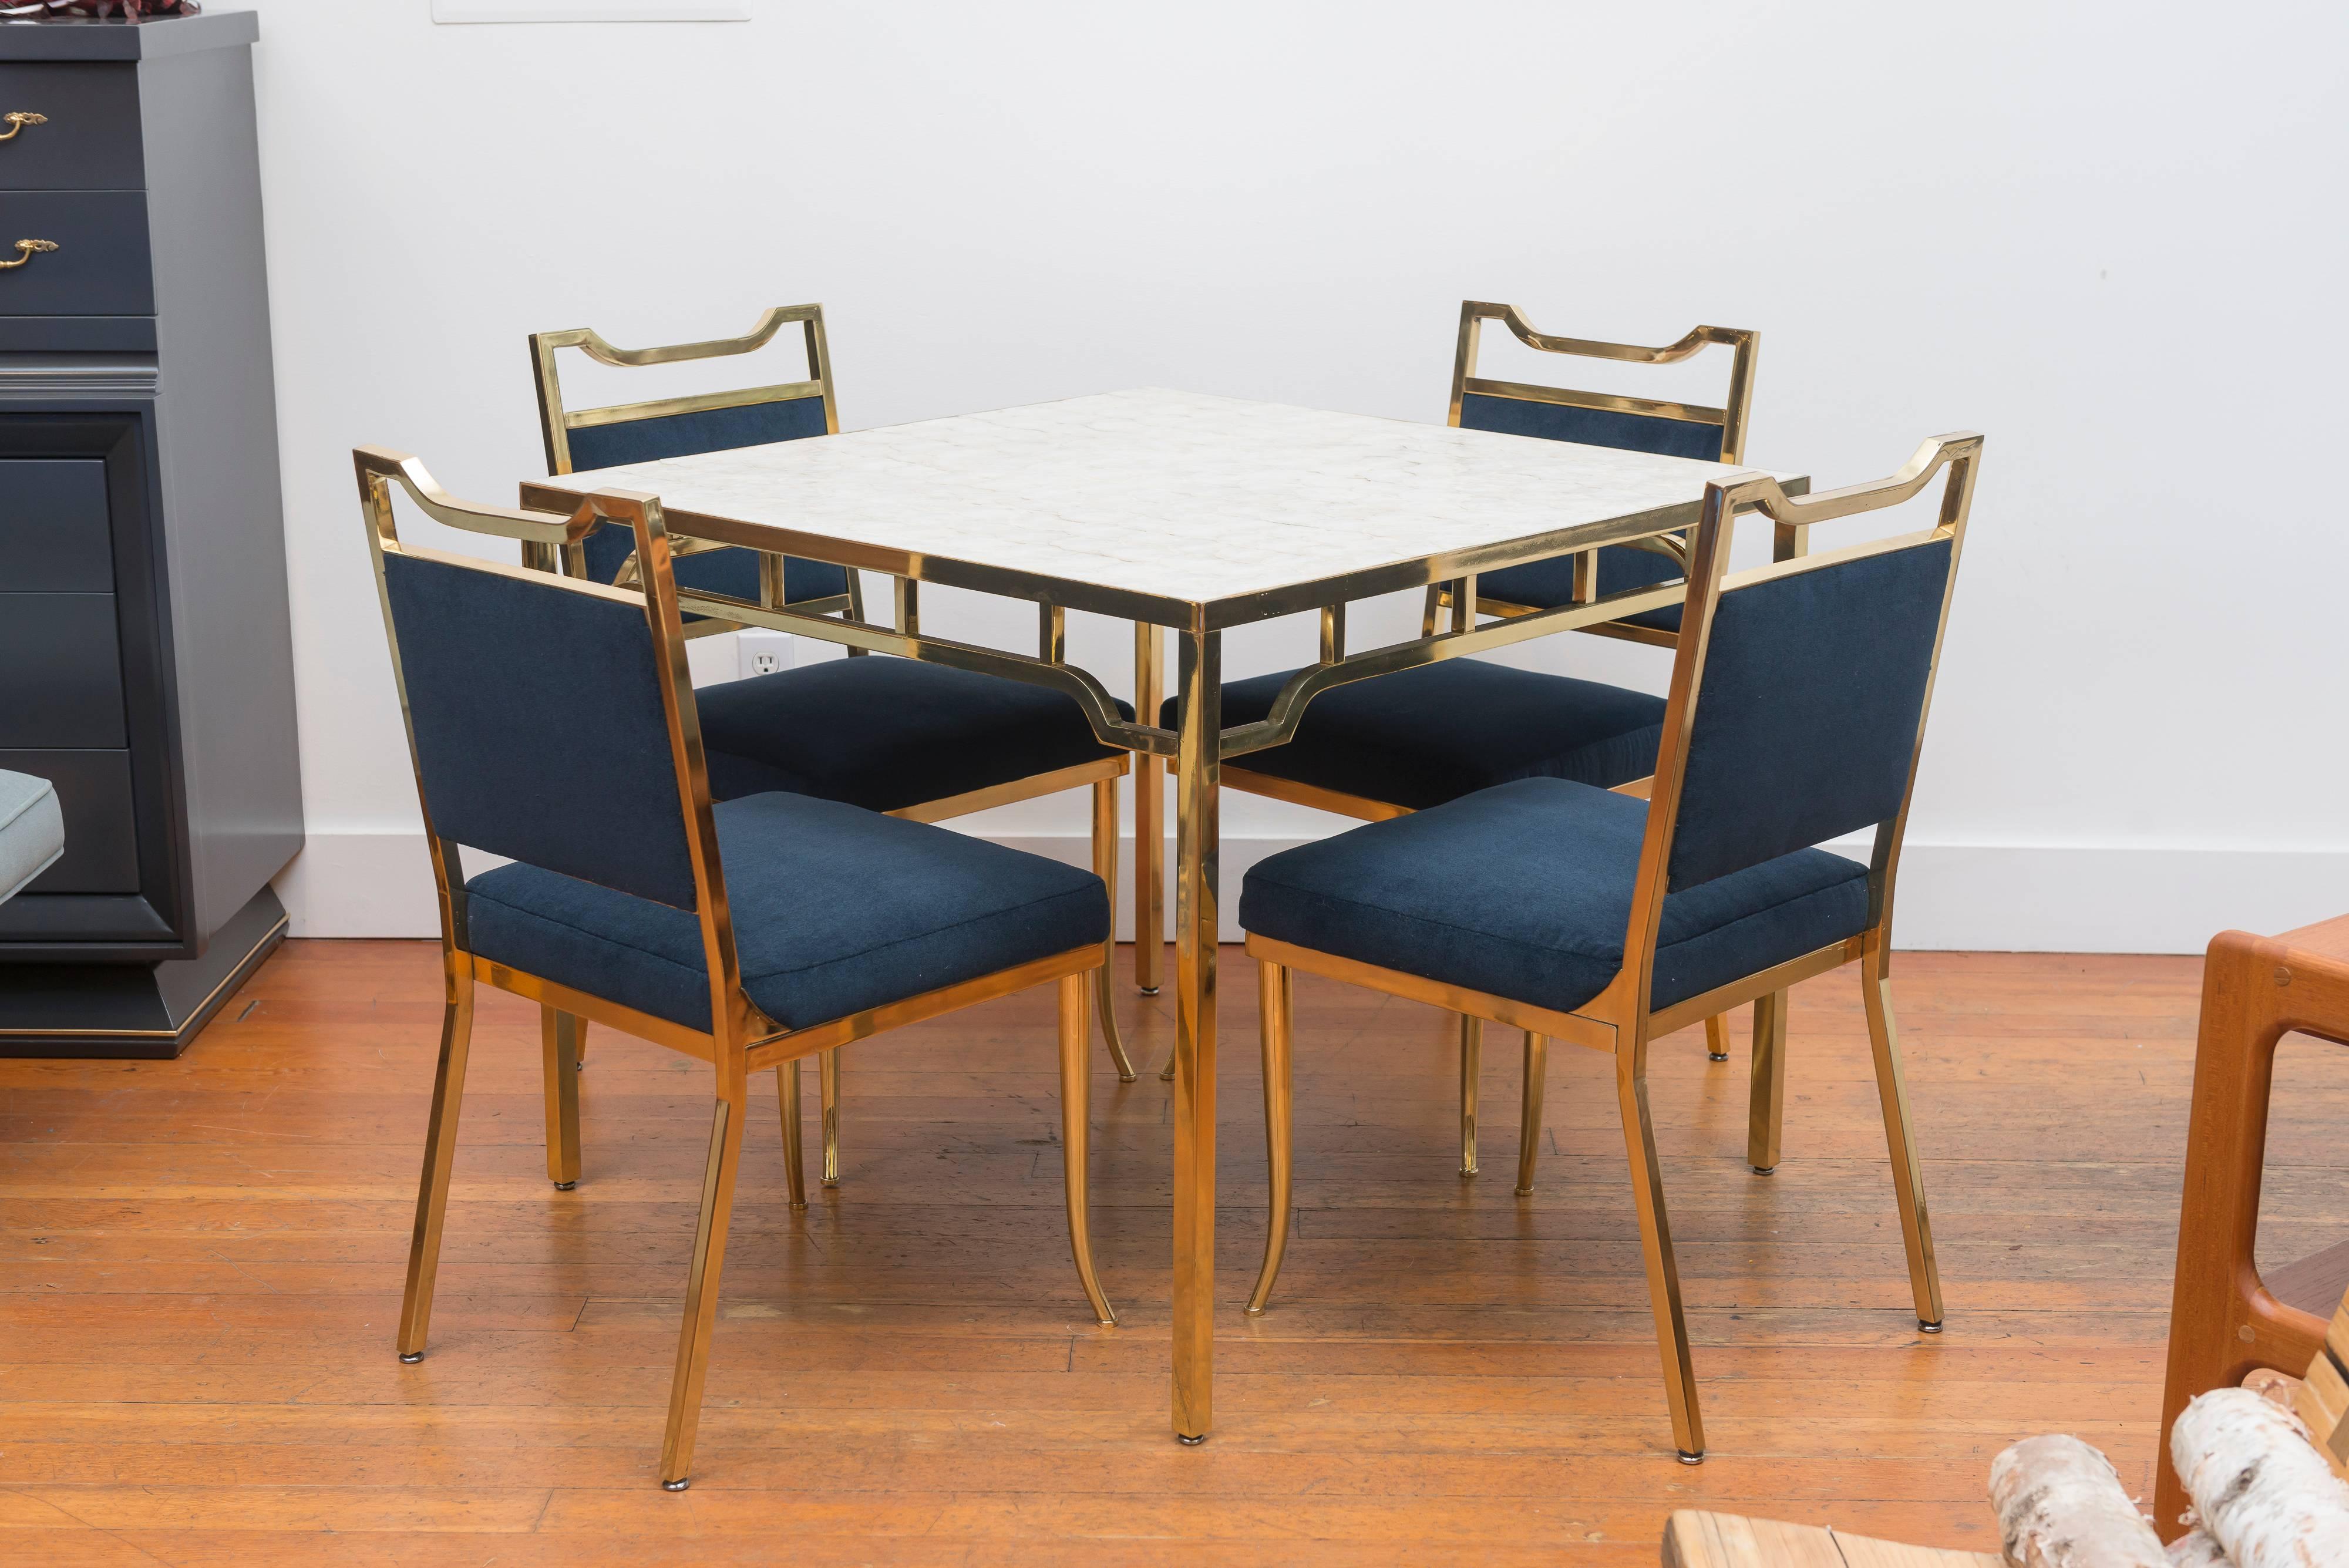 Willian Haines polished brass table set with capiz shell top with four chairs reupholstered in a blue Maharam wool.